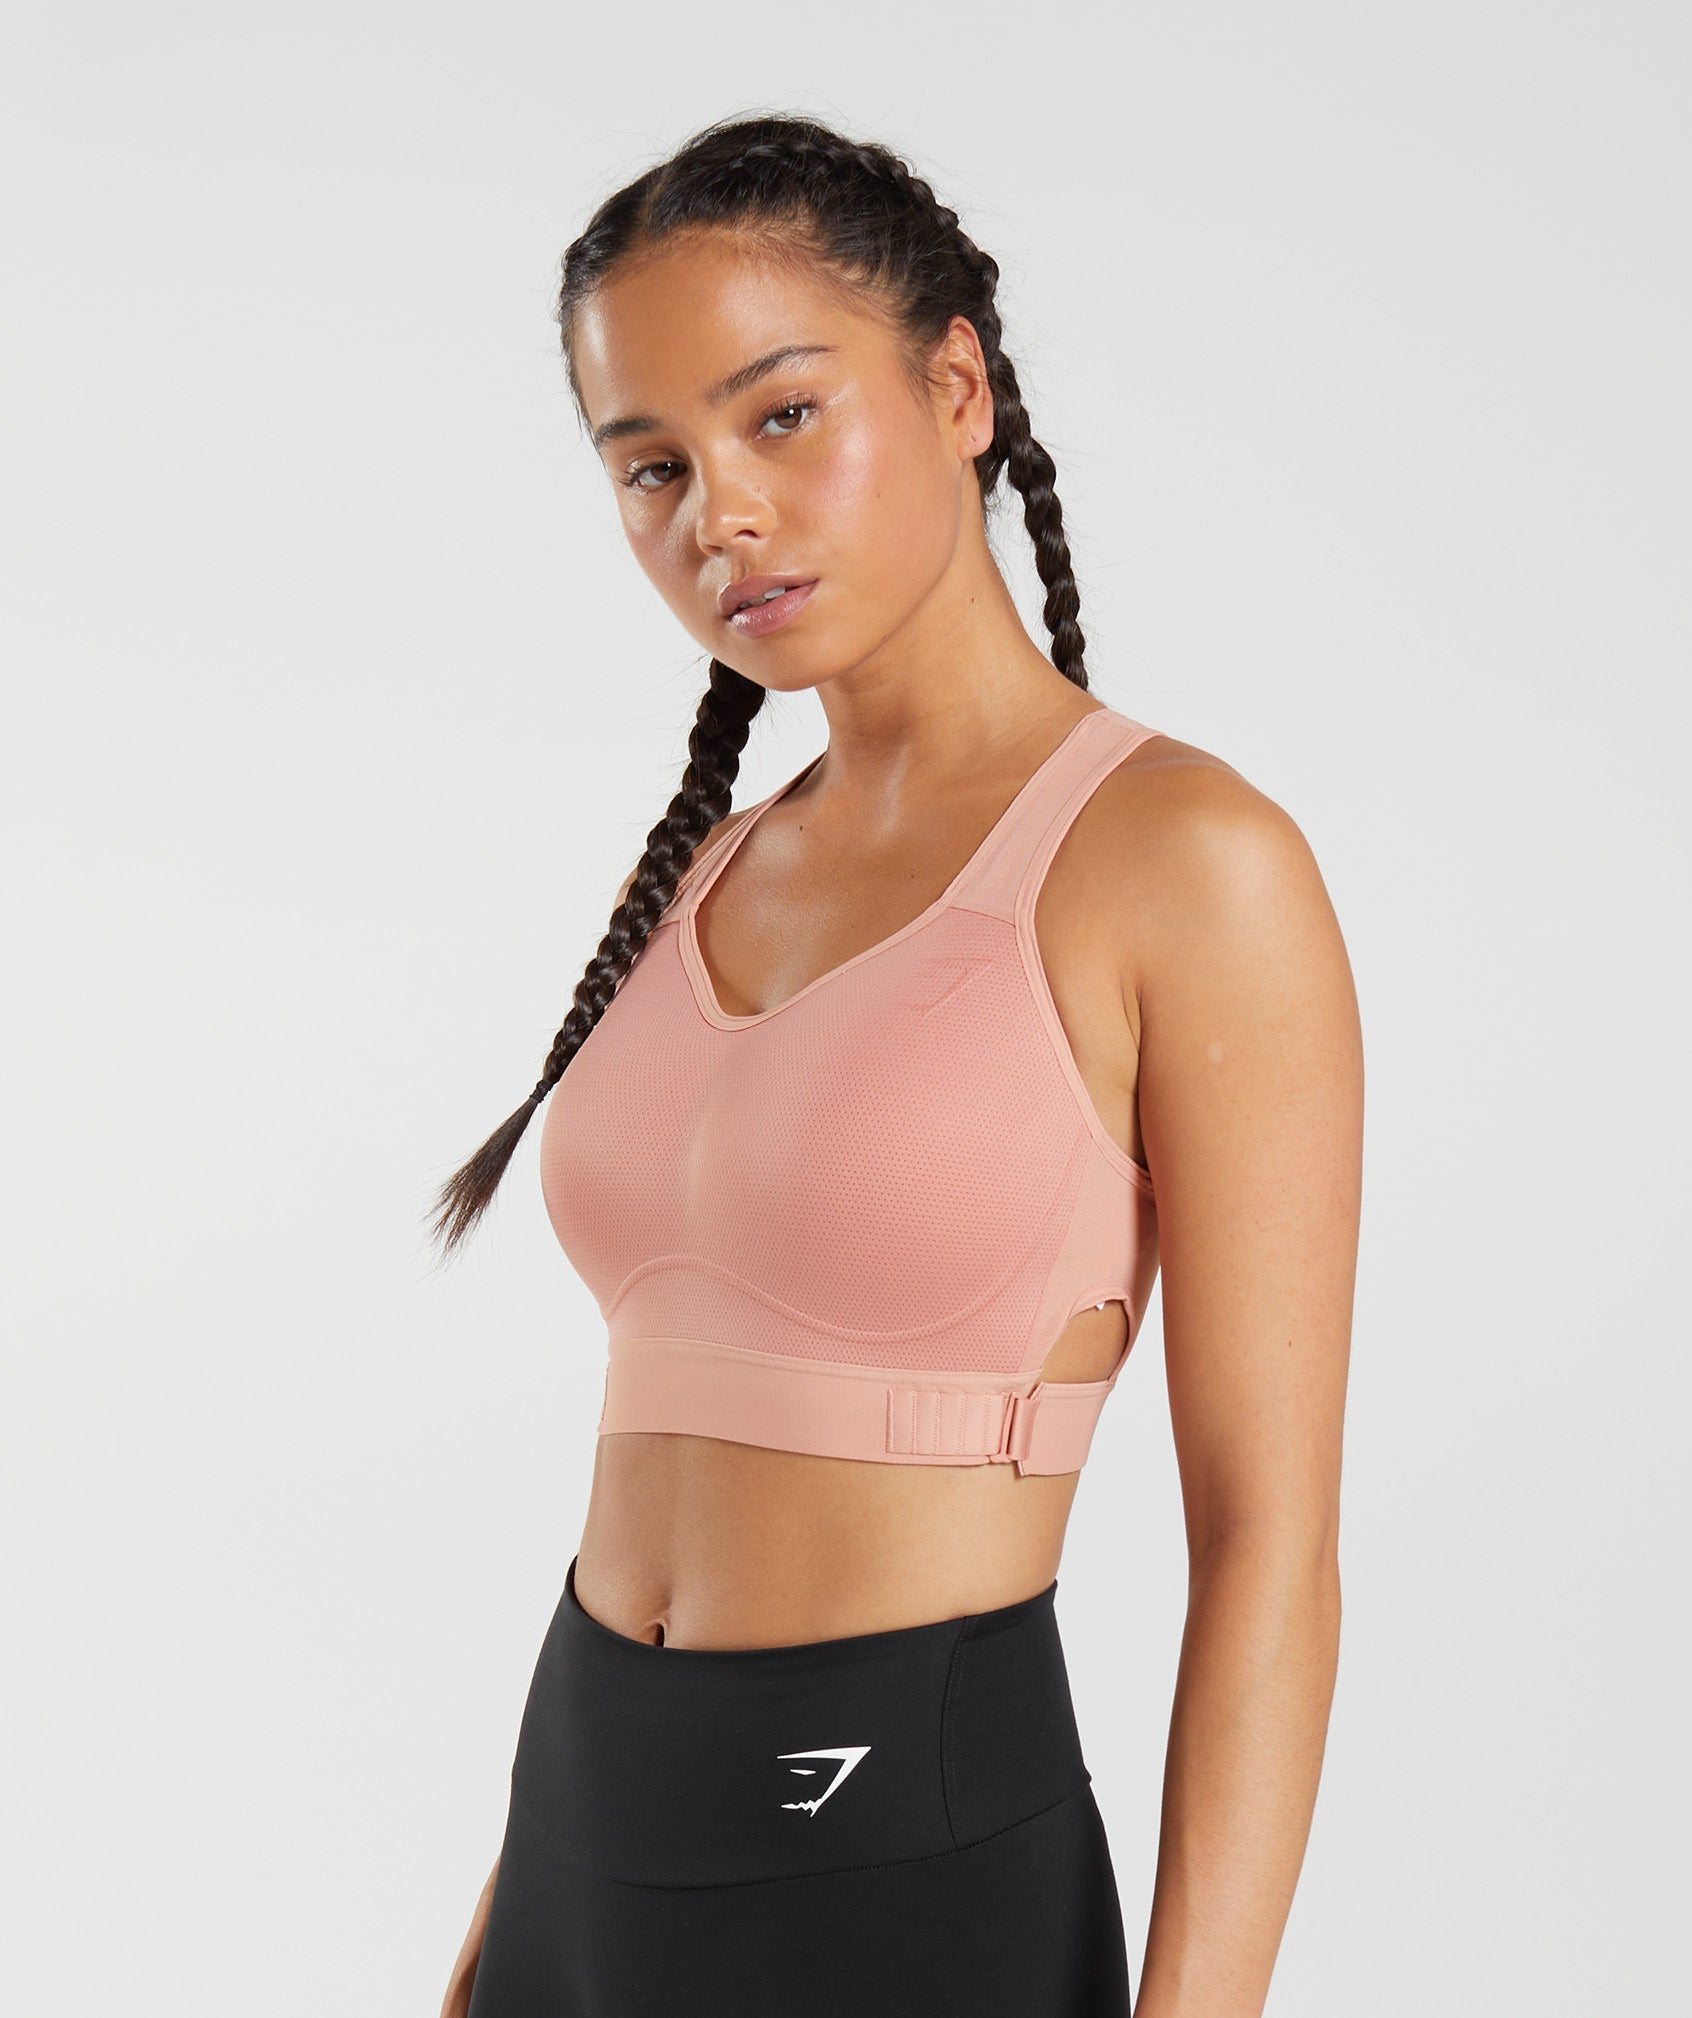 High Impact Sports Bras, Supportive Sports Bras